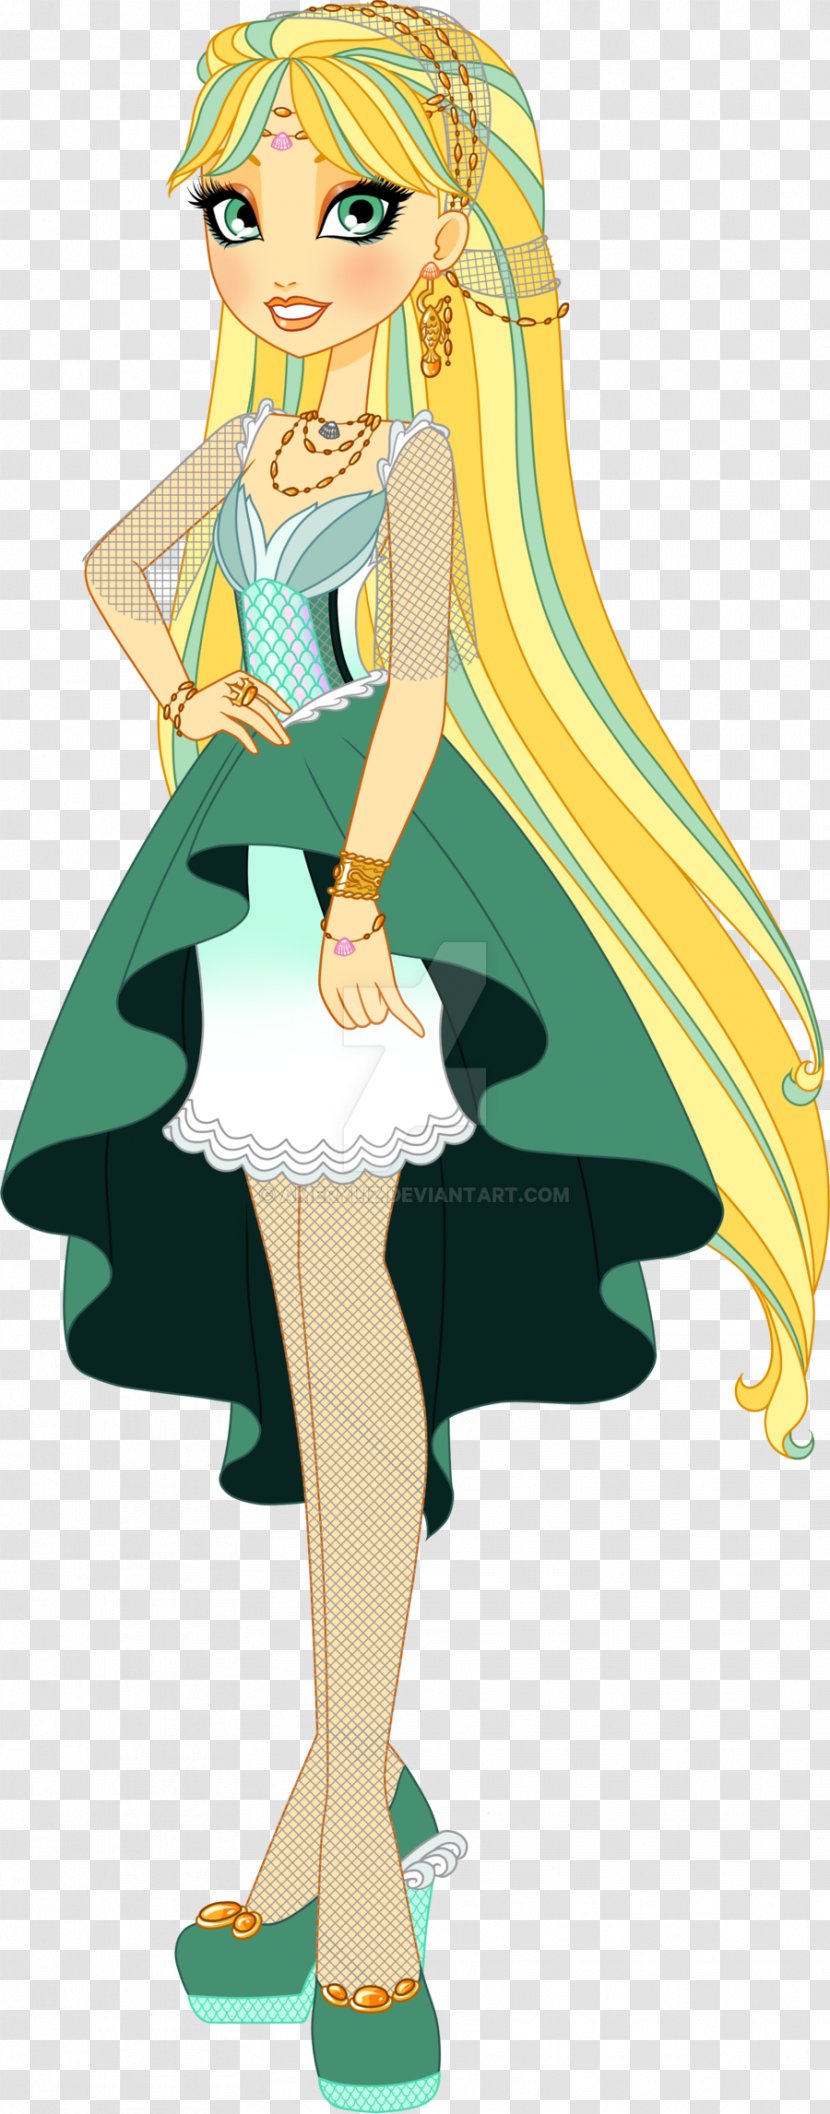 Ever After High Art The Snow Queen Fairy Tale - Heart - Jade Hare Transparent PNG